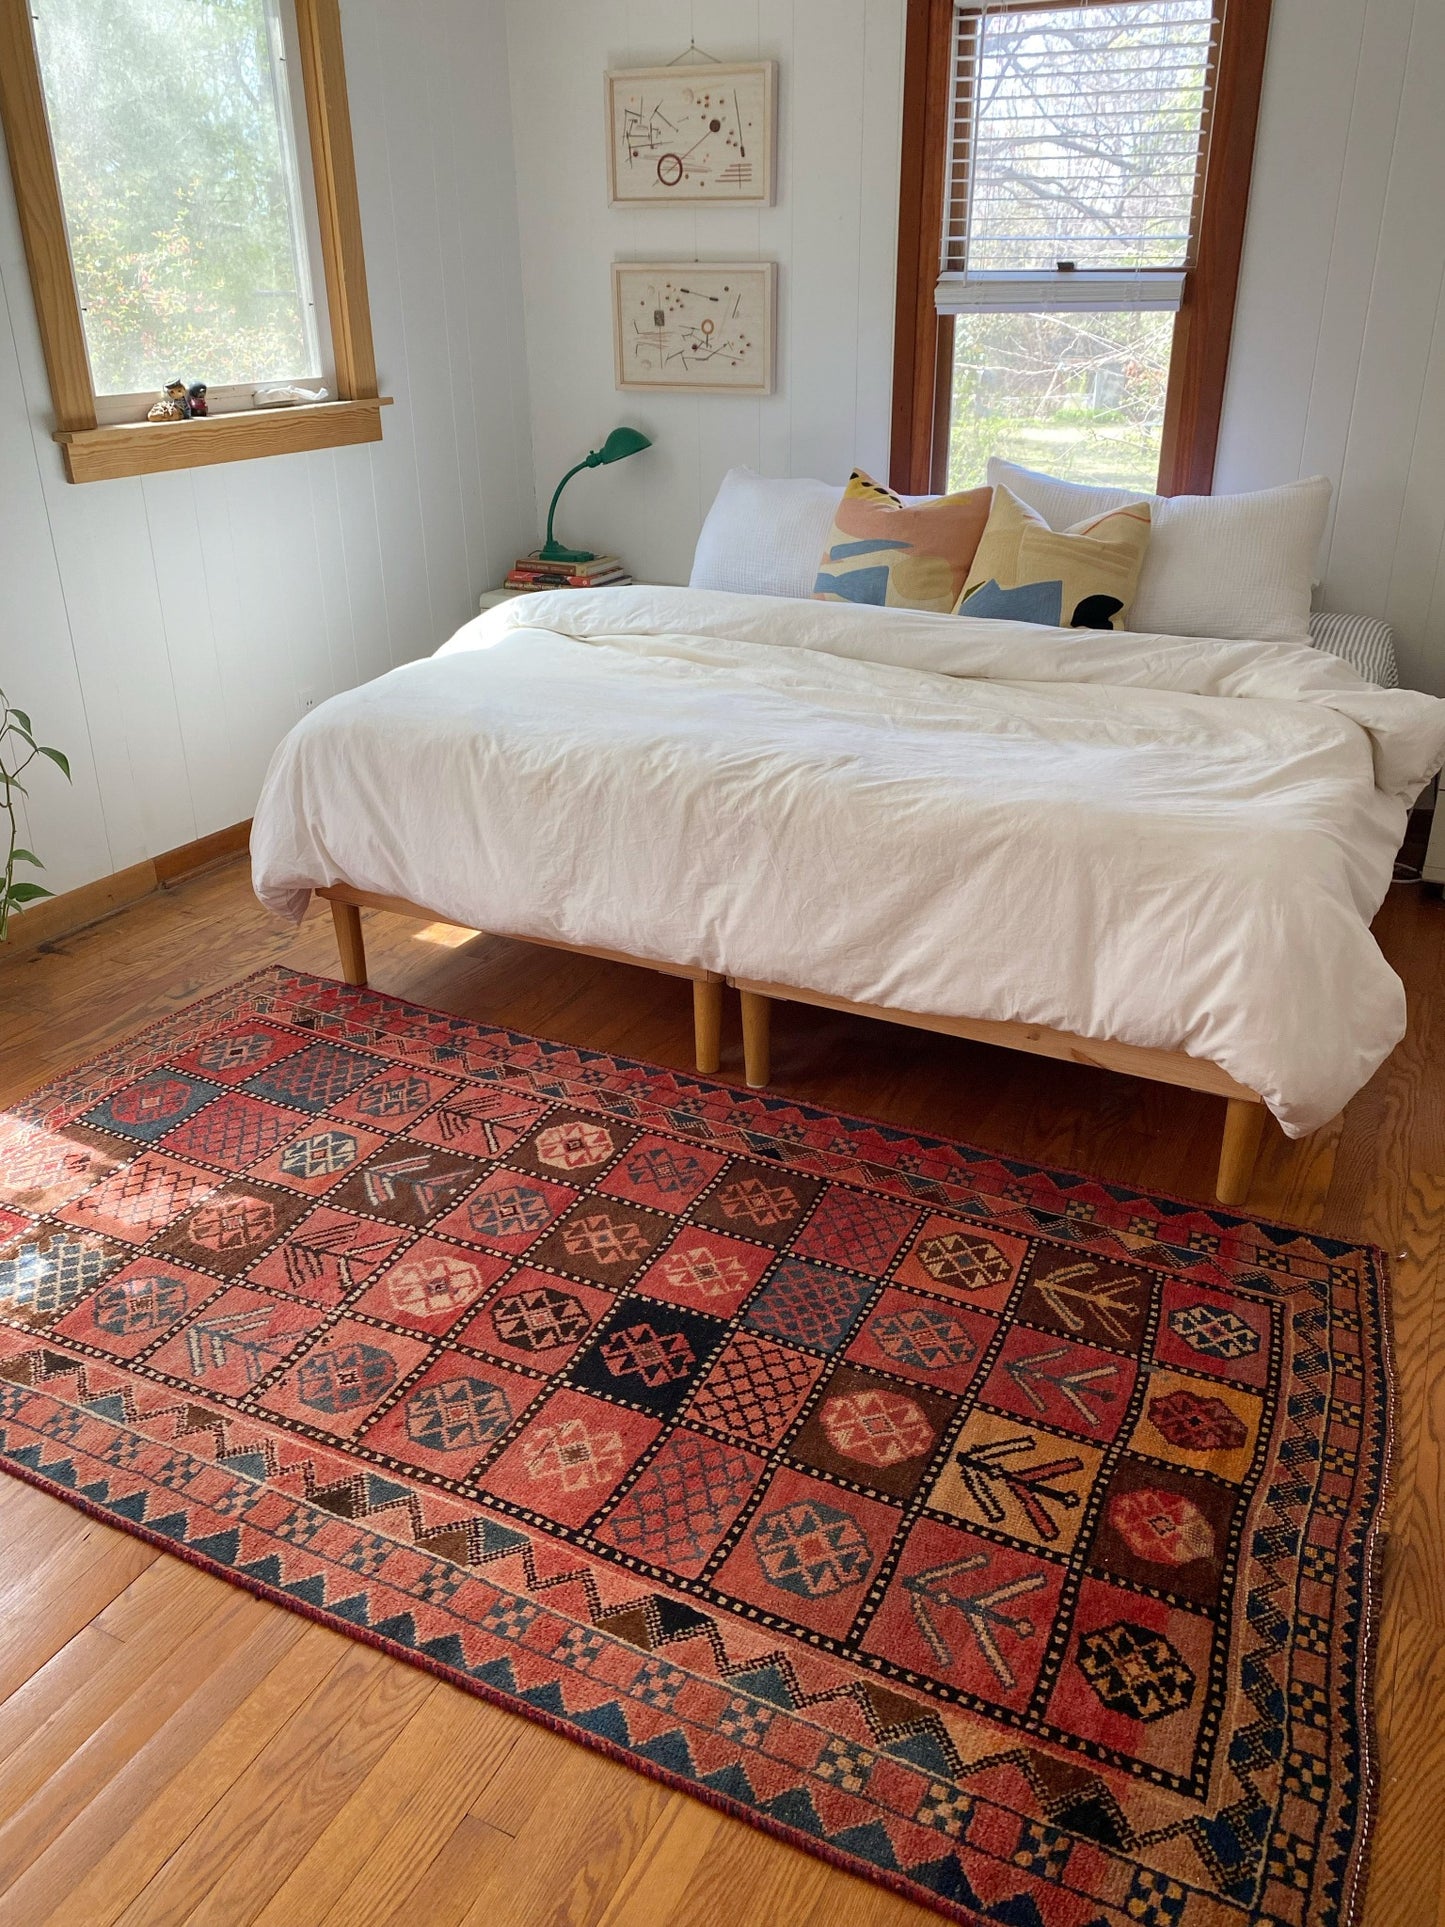 See Diavola Vintage Persian Rug with a King Size Bed